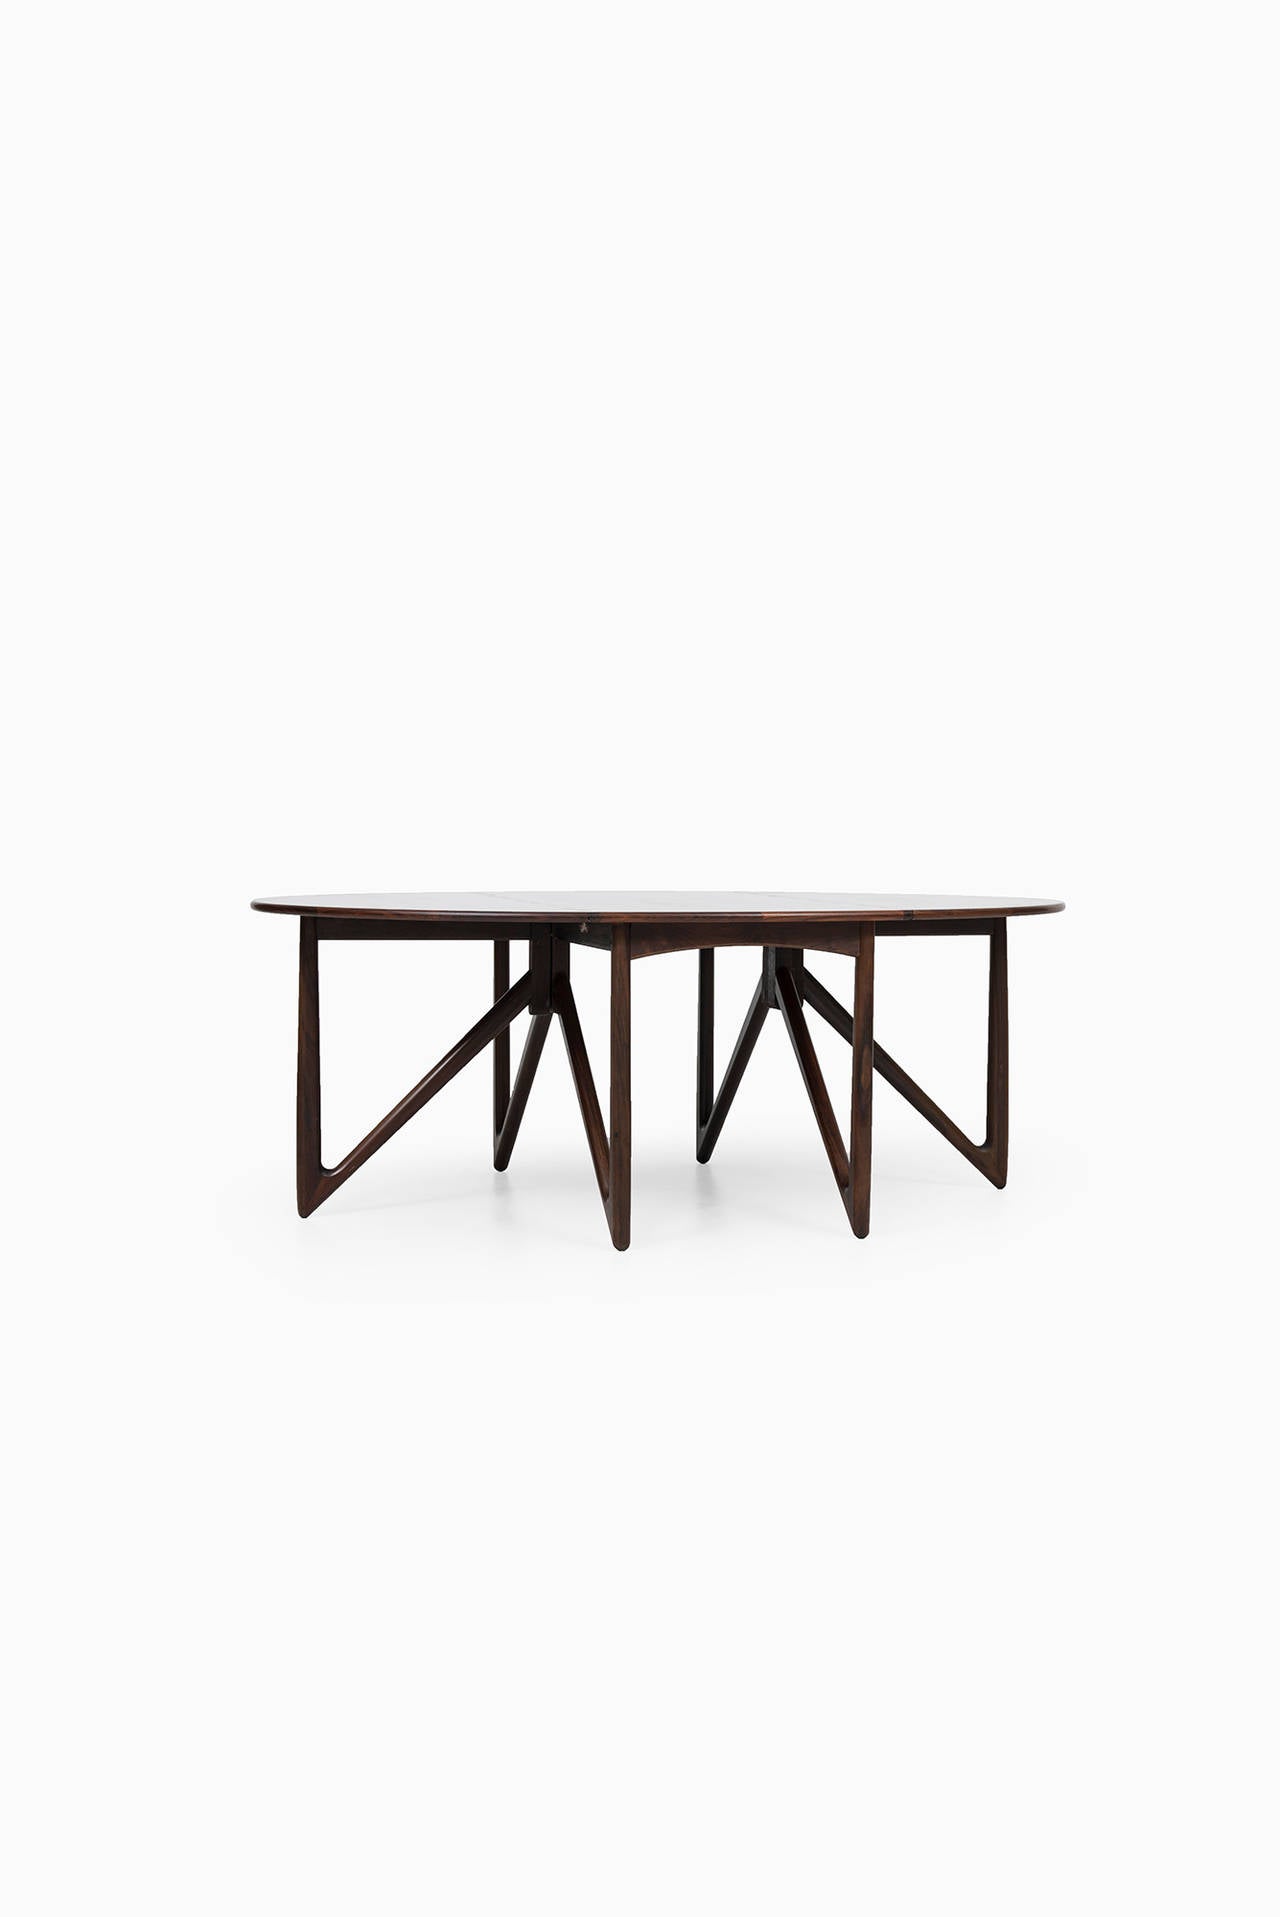 Rare gate leg dining table in rosewood designed by Kurt Østervig. Produced by Jason Møbler in Denmark.